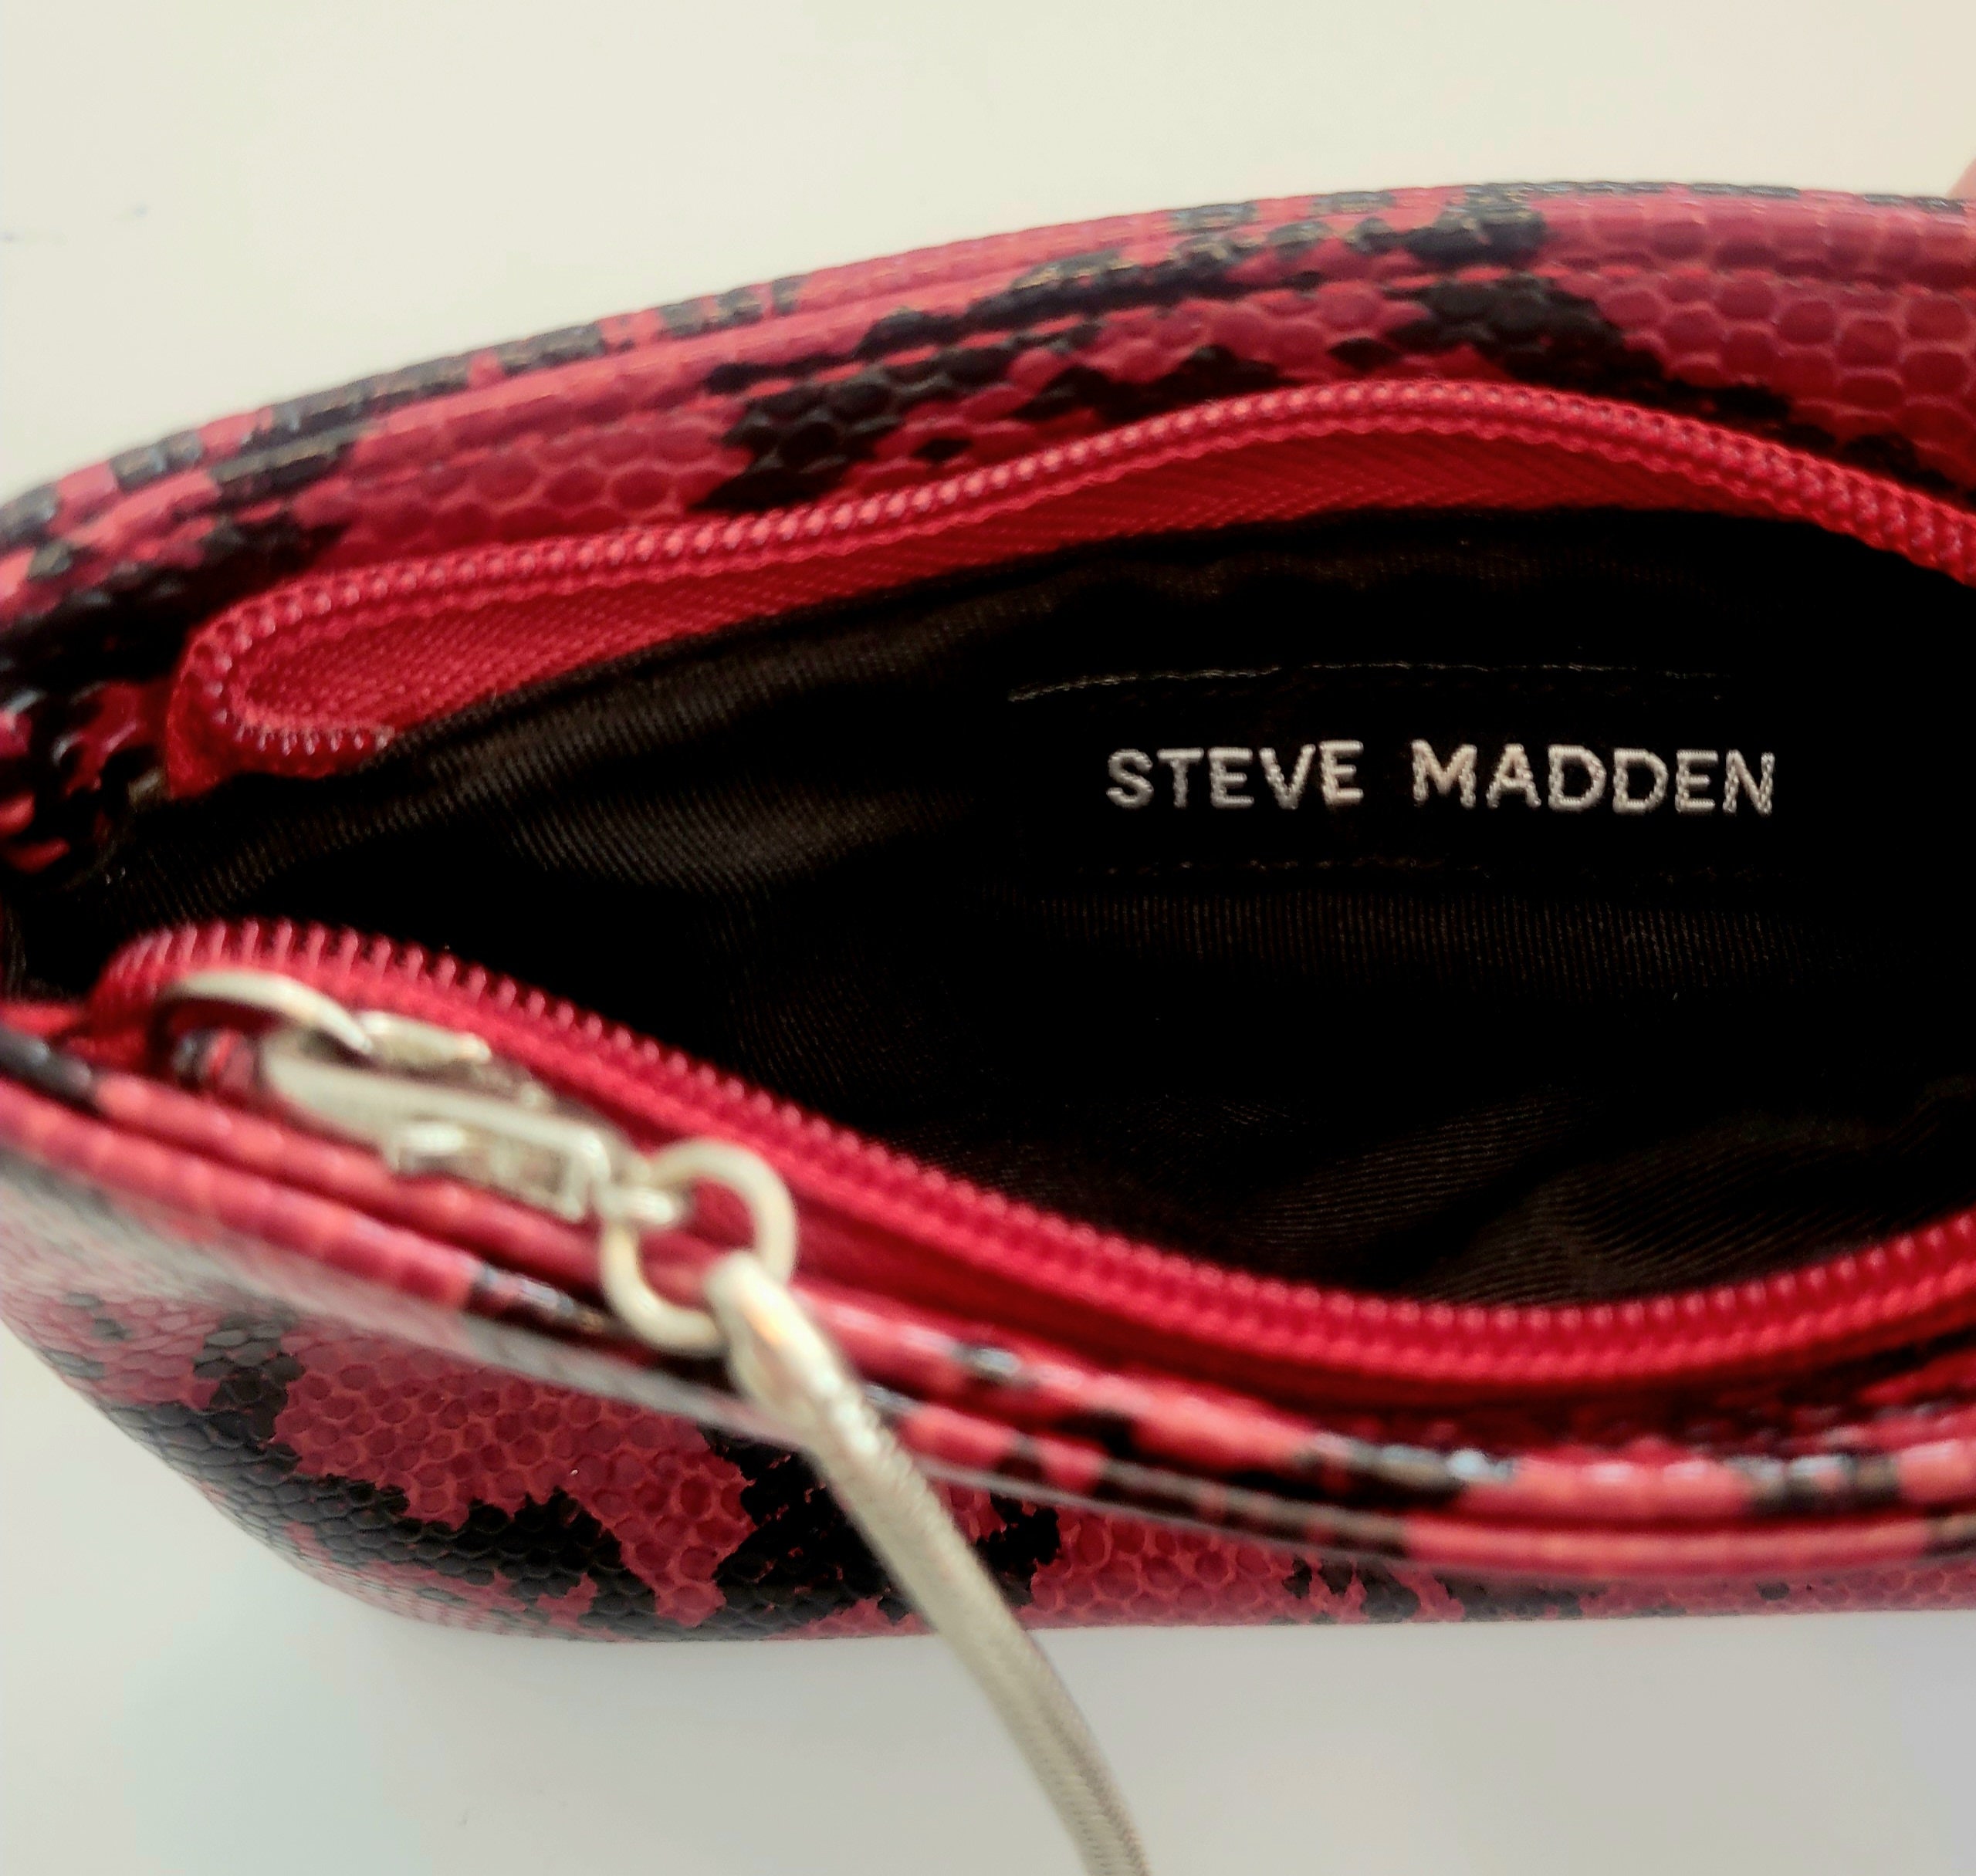 STEVE MADDEN HANDBAG RED BJULES QUILTED W Crossbody Strap Silver Accents  NWT | eBay